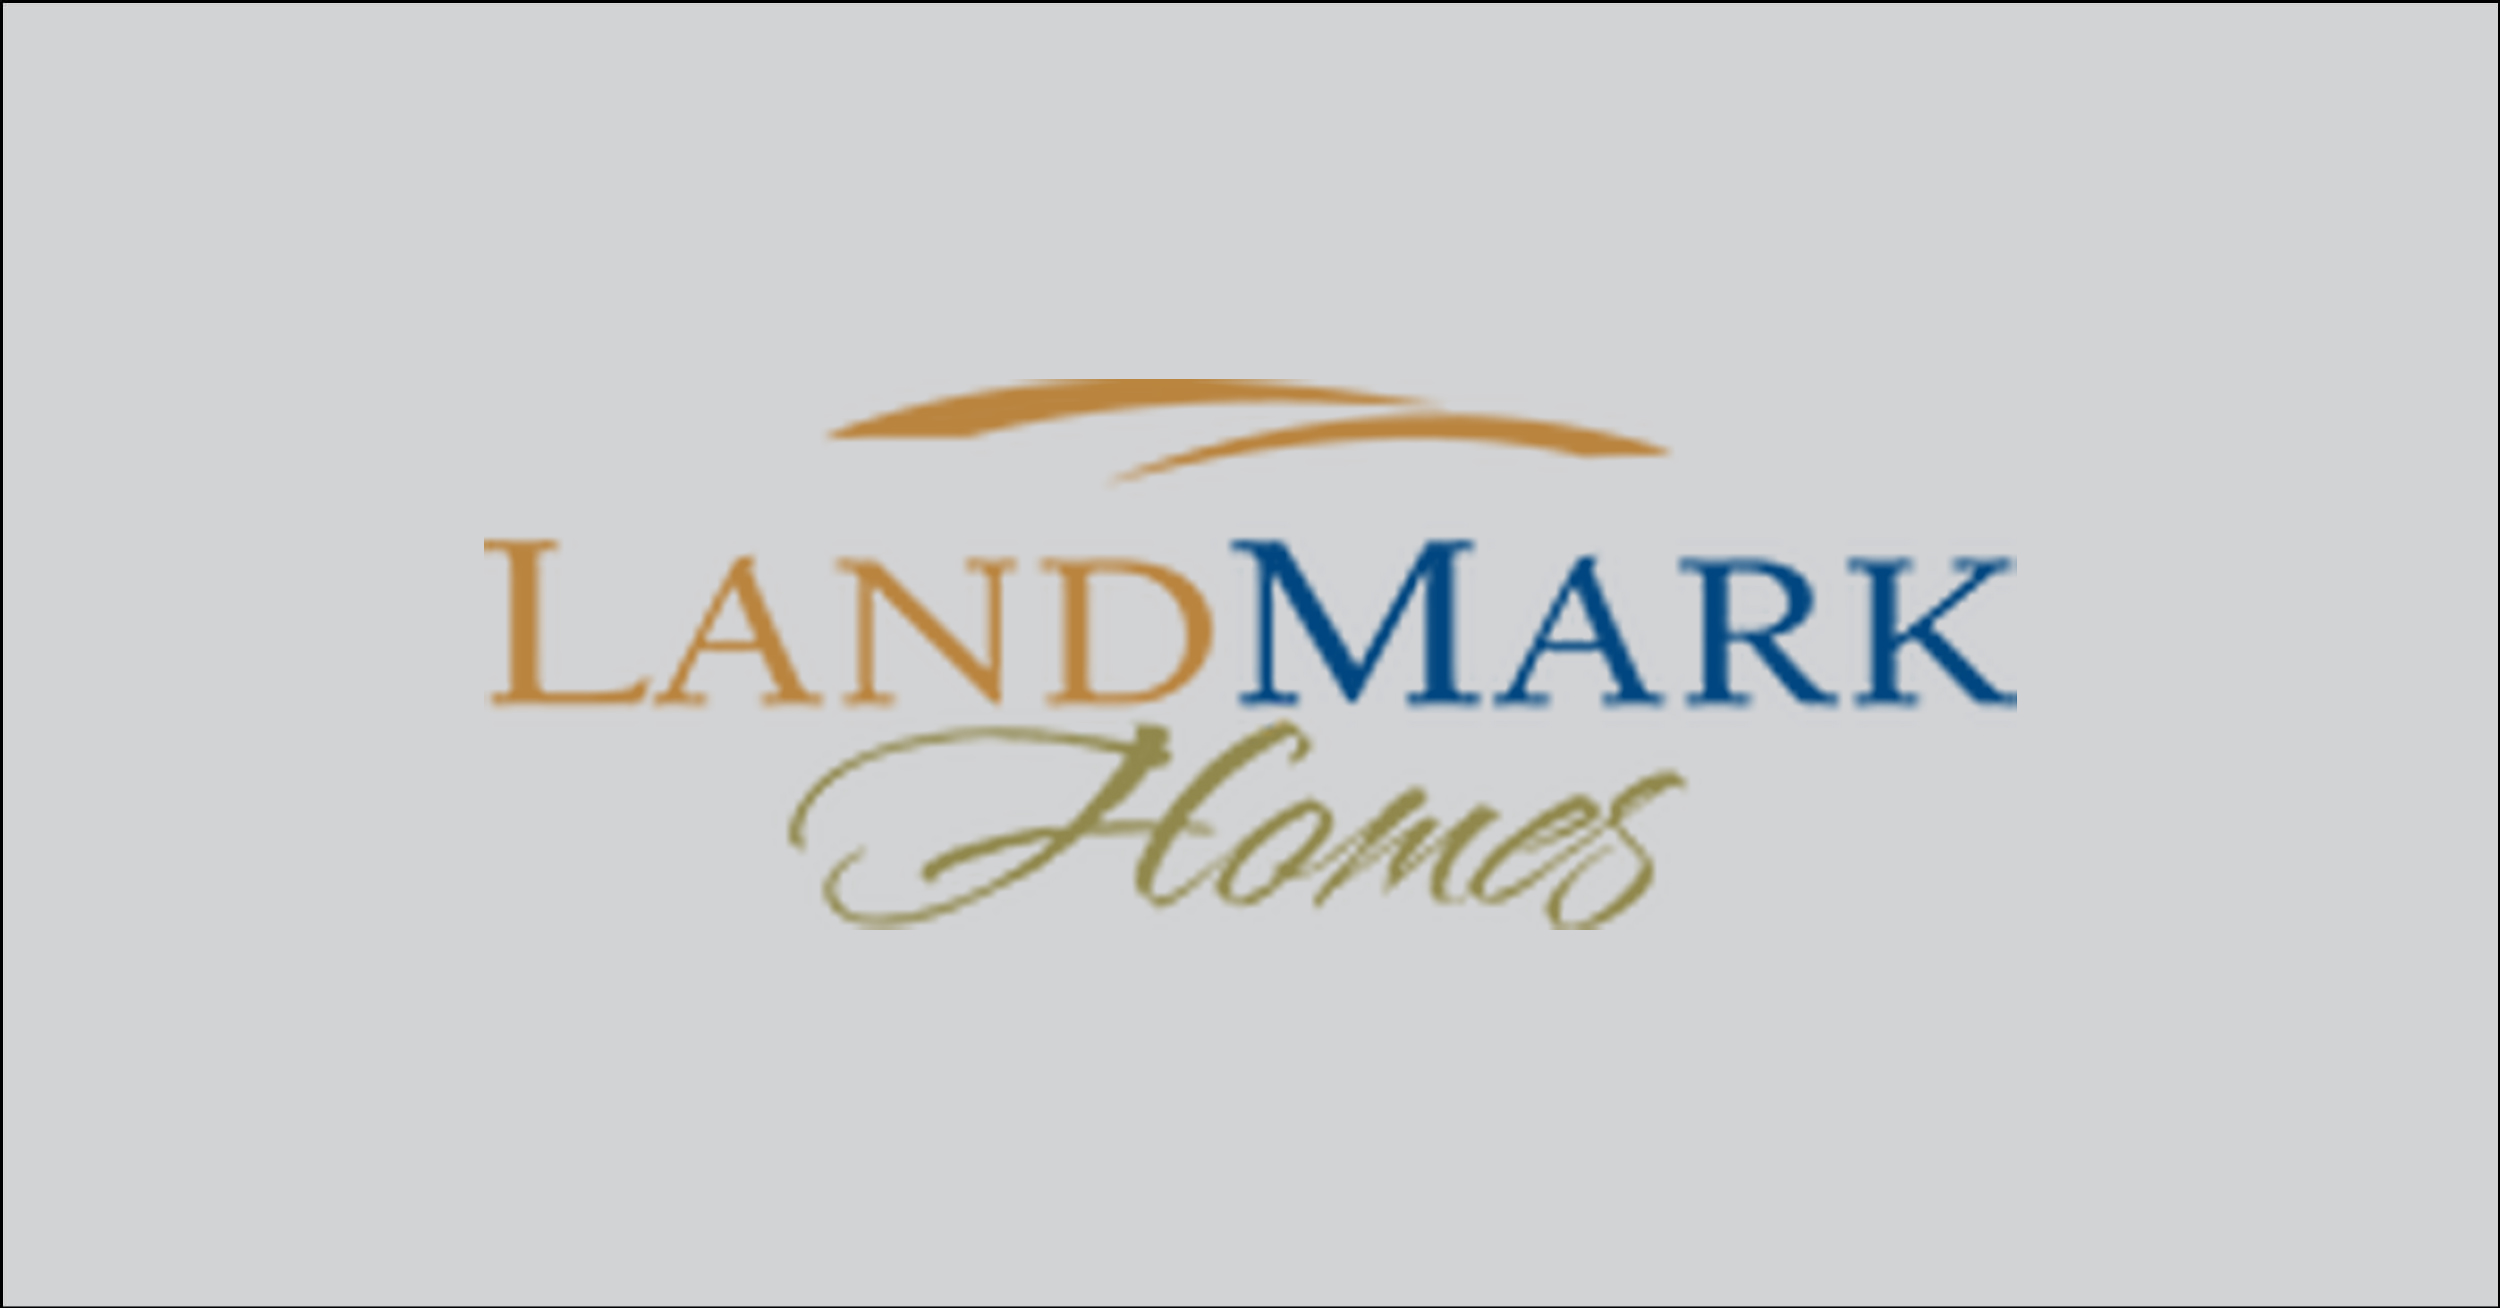 Find new construction or search for new homes and communities by Landmark Homes in Colorado